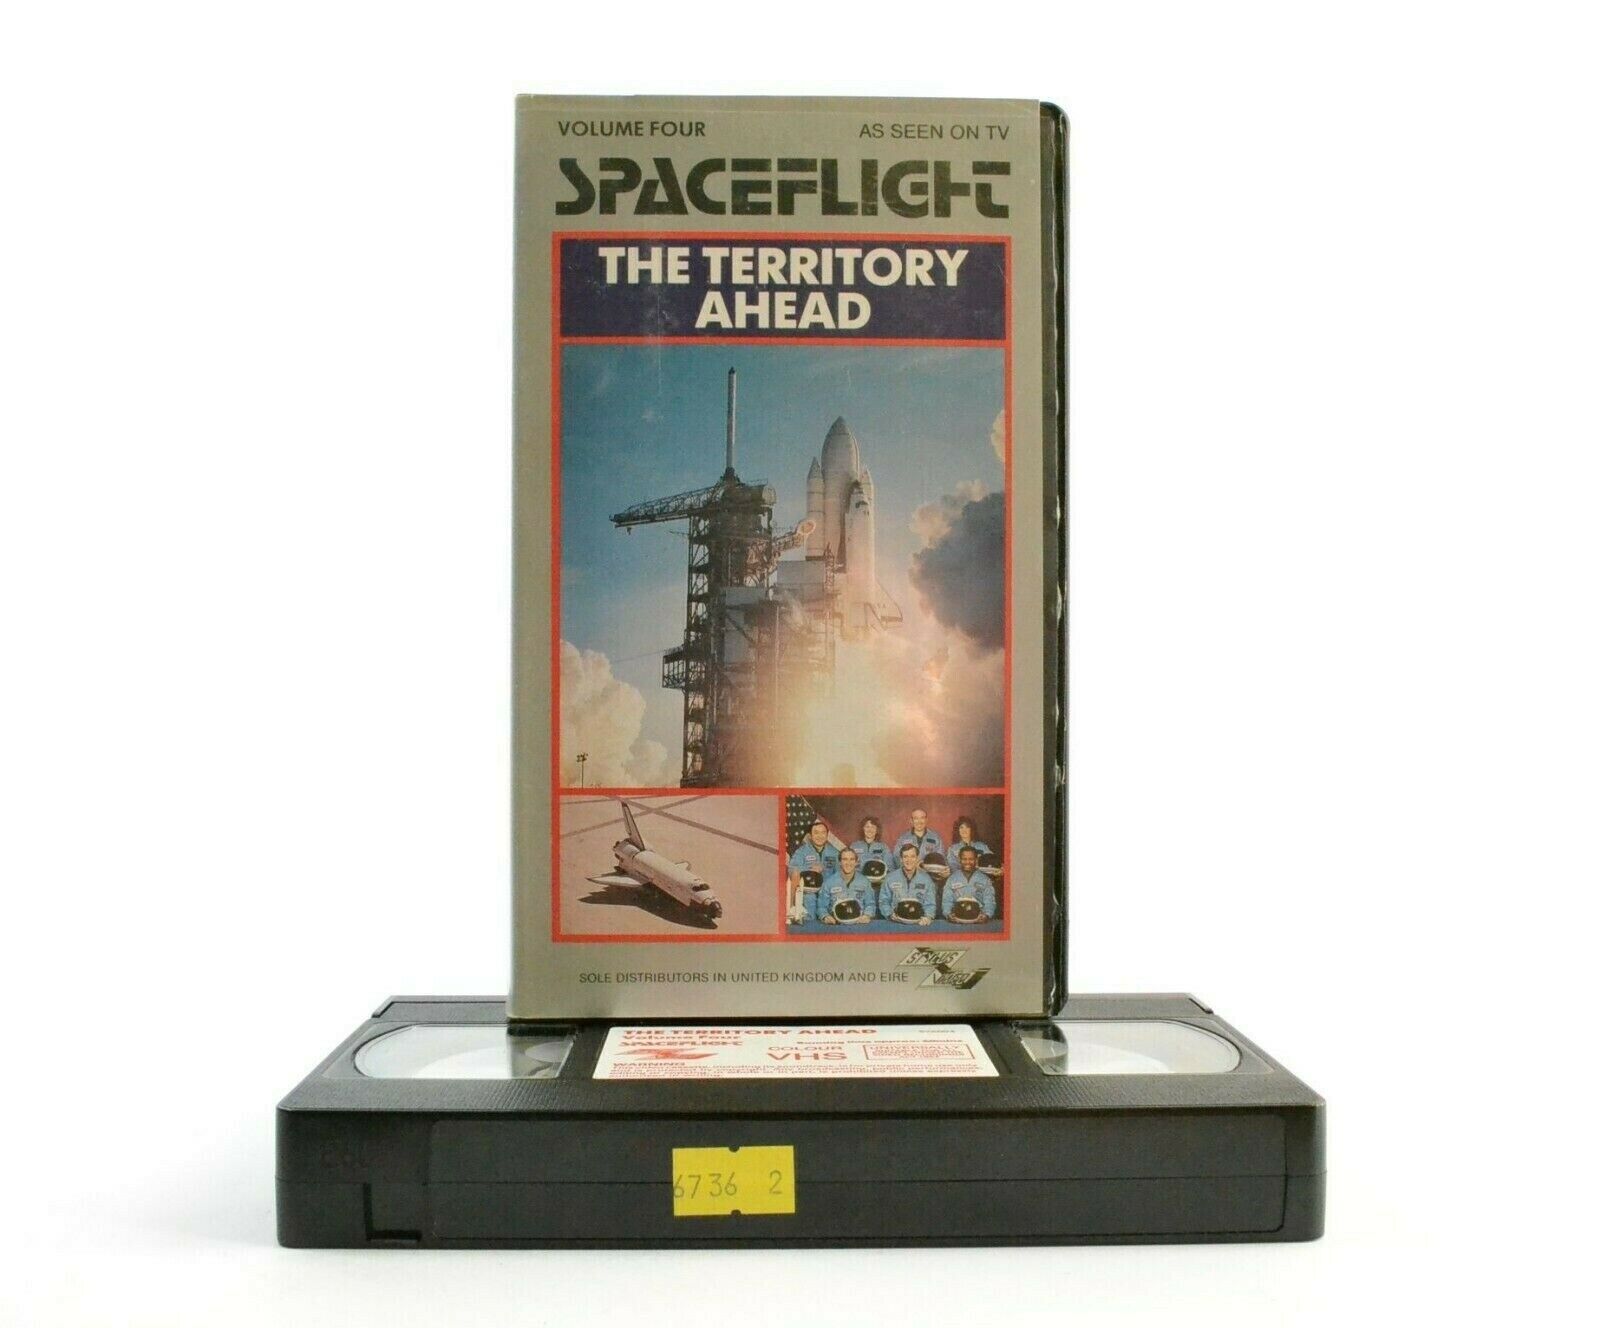 Spaceflight, Vol.Four: The Territory Ahead - Introduced By Martin Sheen - VHS-